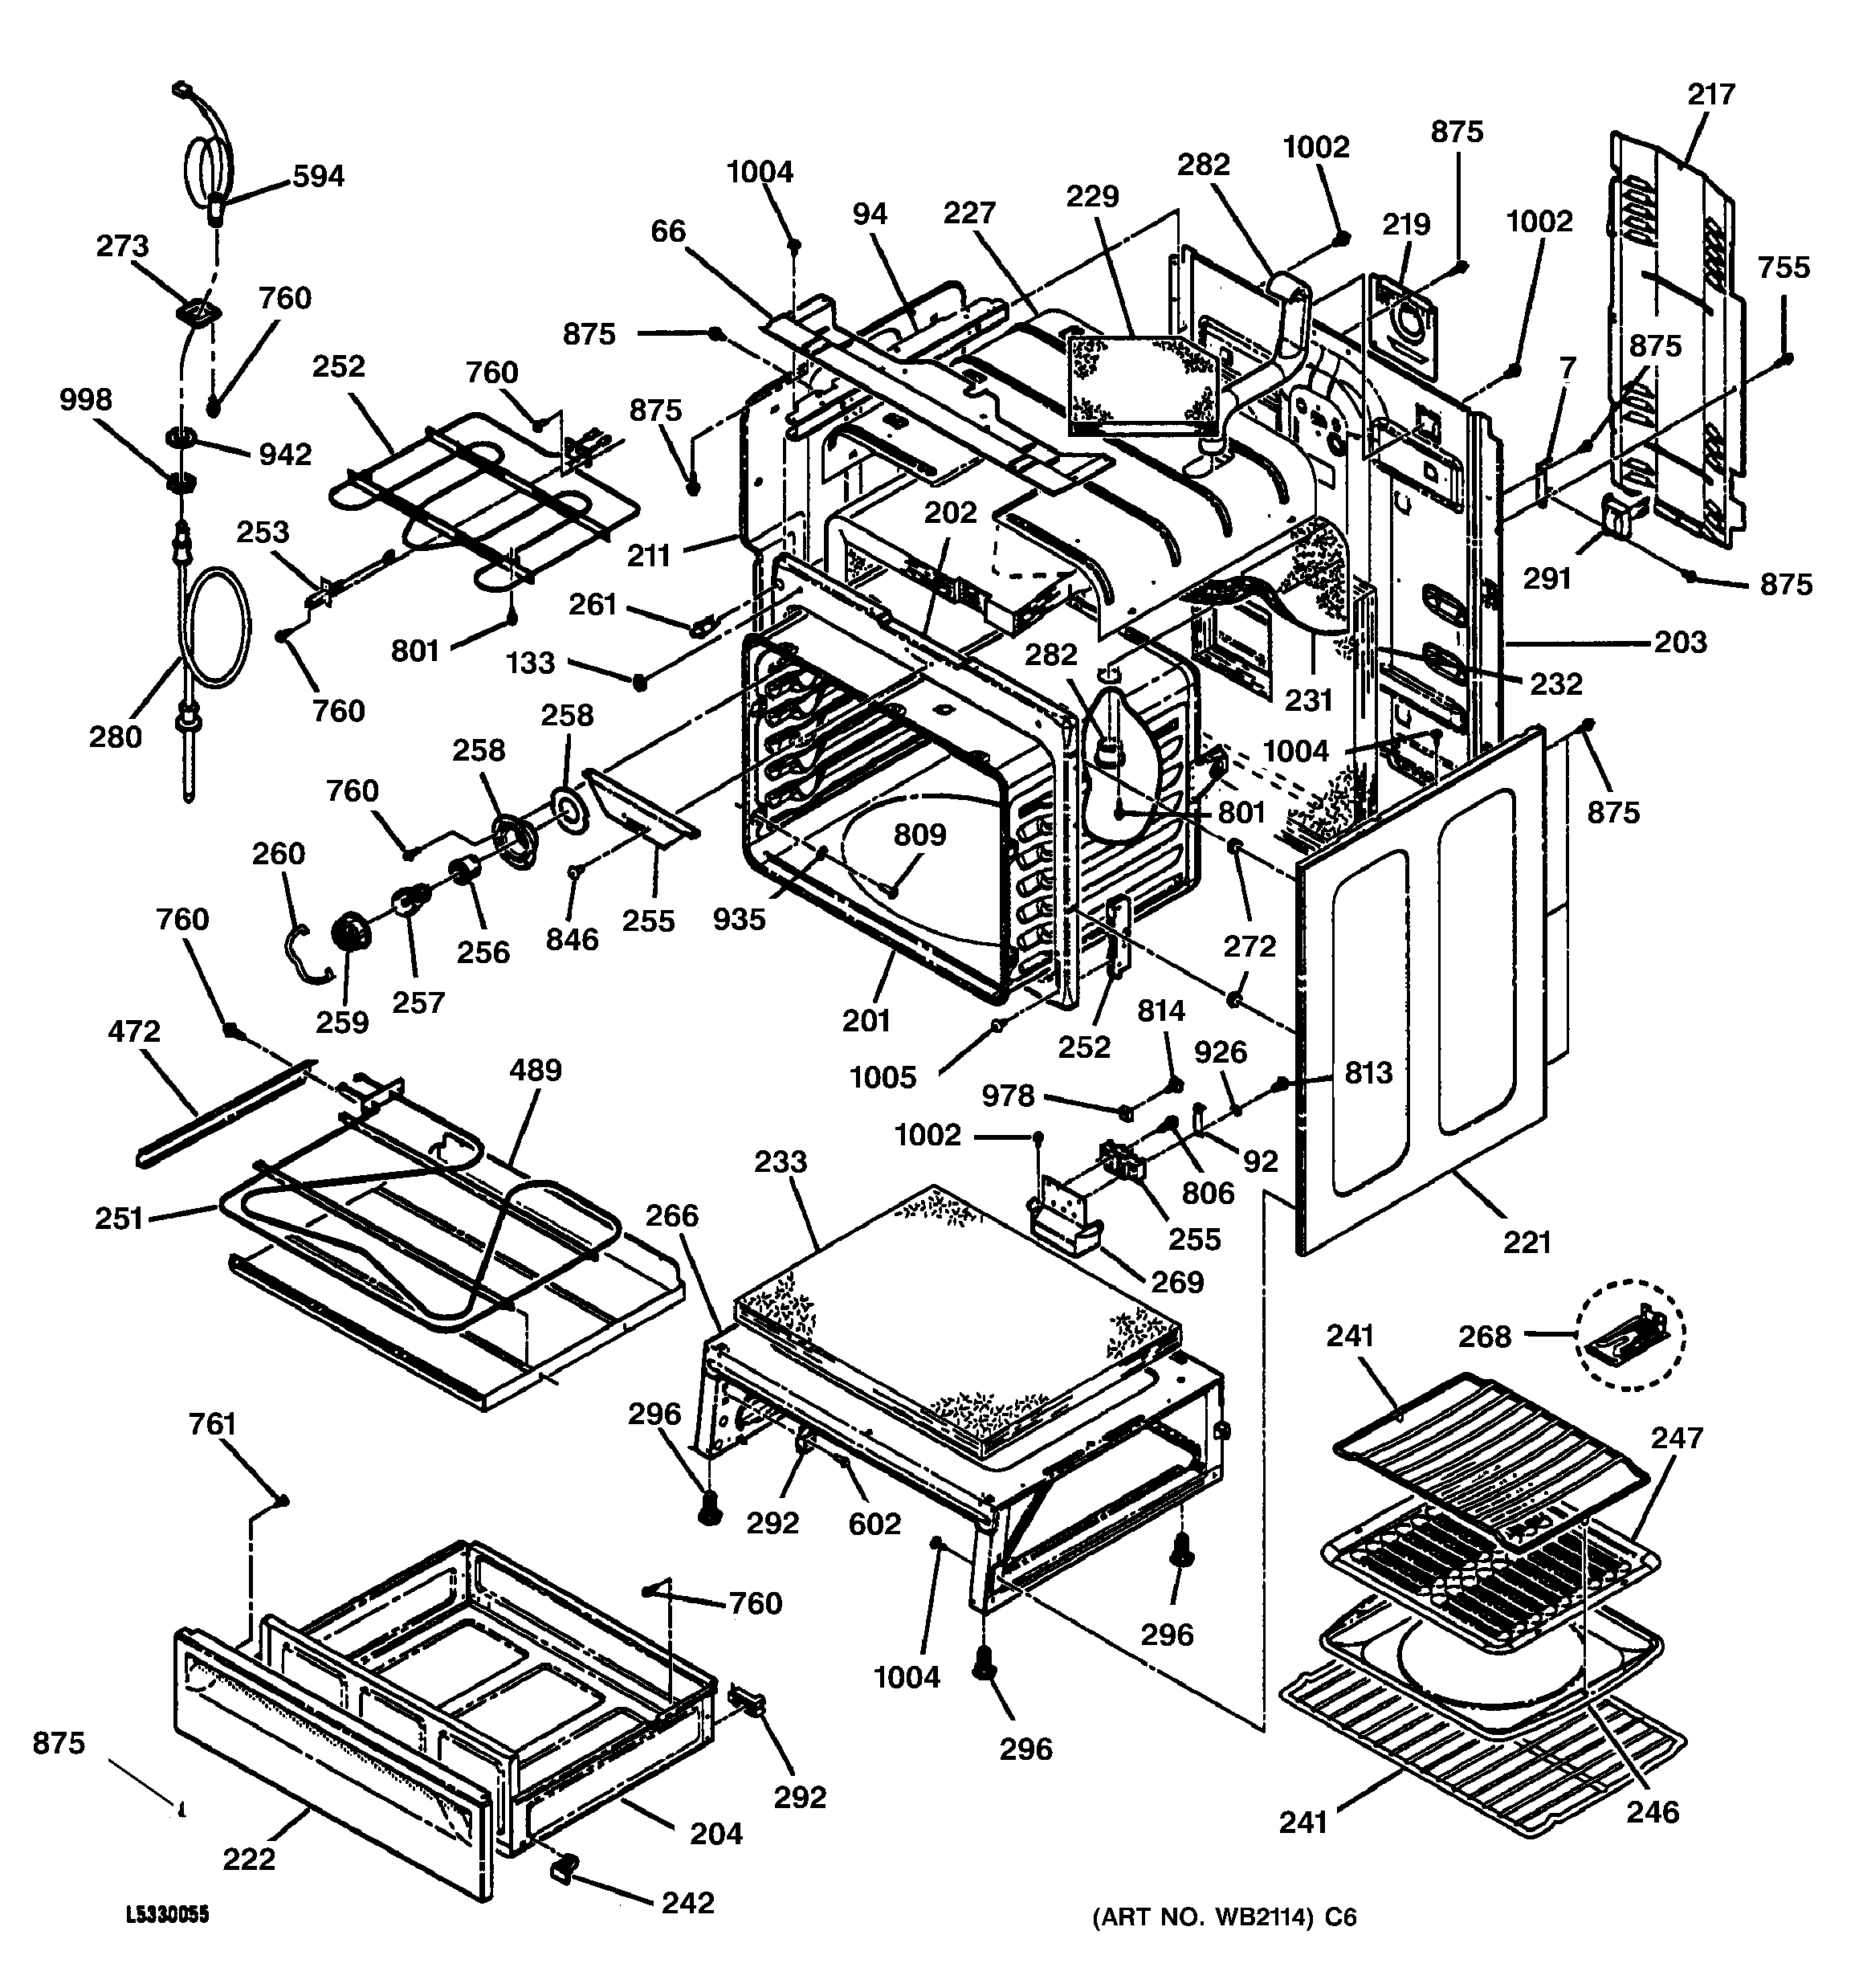 BODY & DRAWER PARTS